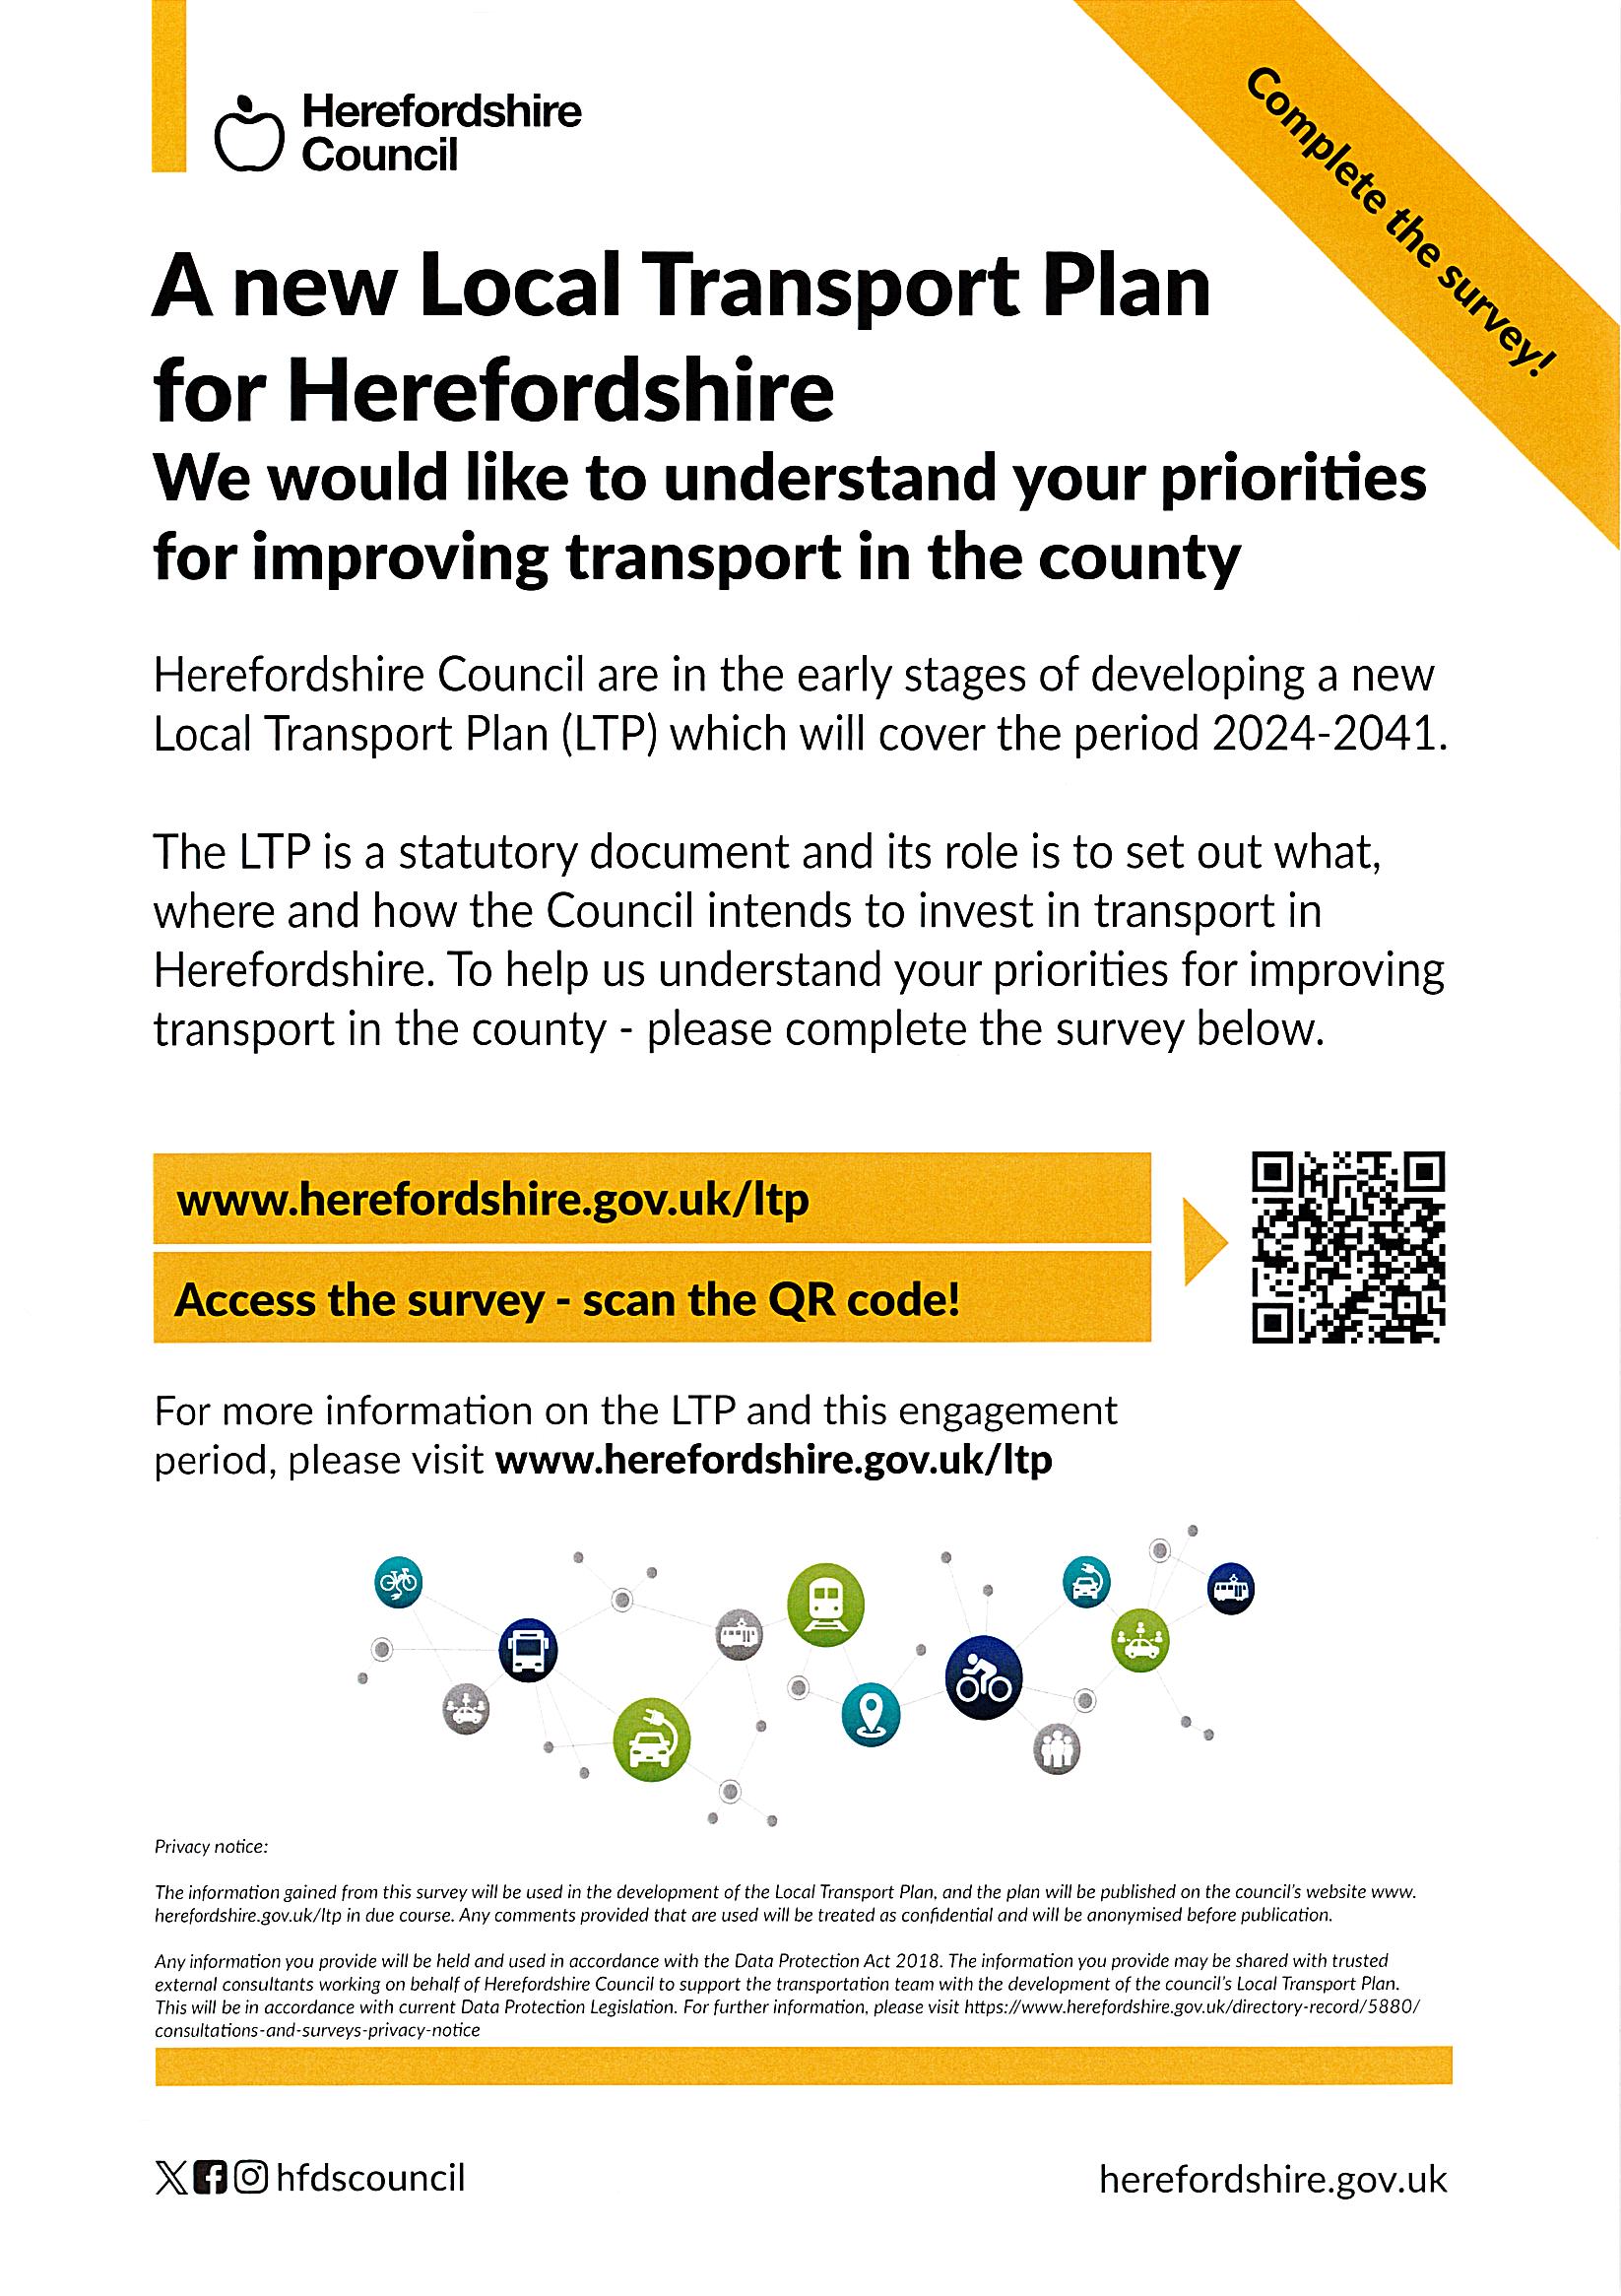 Local Transport Plan for Herefordshire